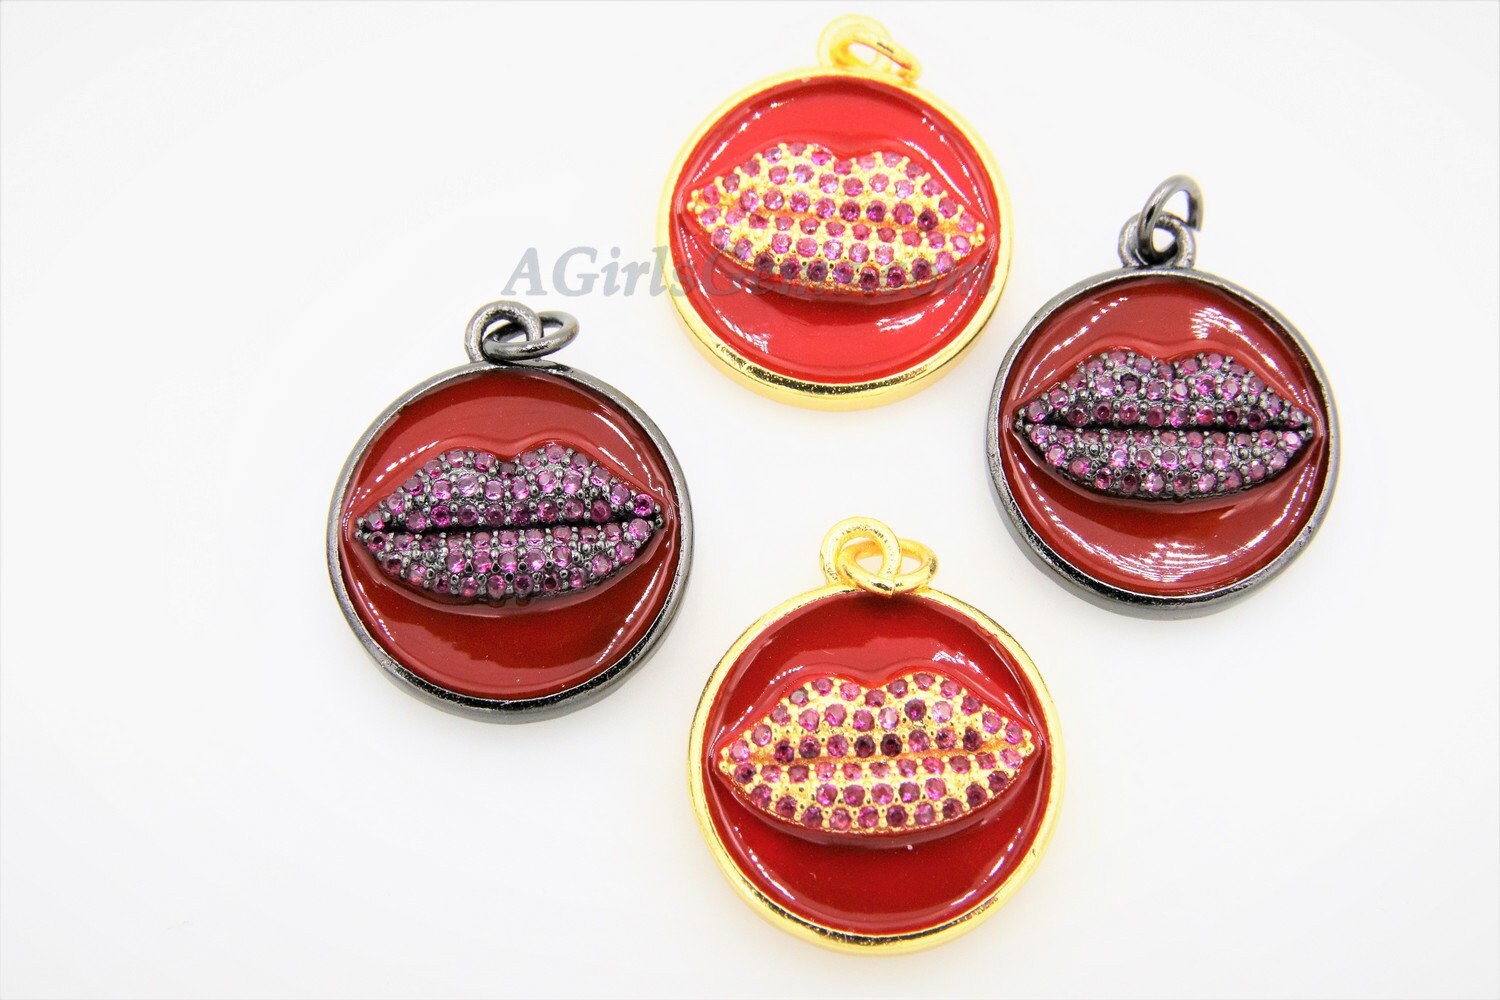 Enamel Pendant Red Lips Charms, CZ Micro Pave Kiss Charms in 18 k Gold/Black Rhodium #31, Round Circle 18 mm Disc *Cute* Red Burgundy *Love*